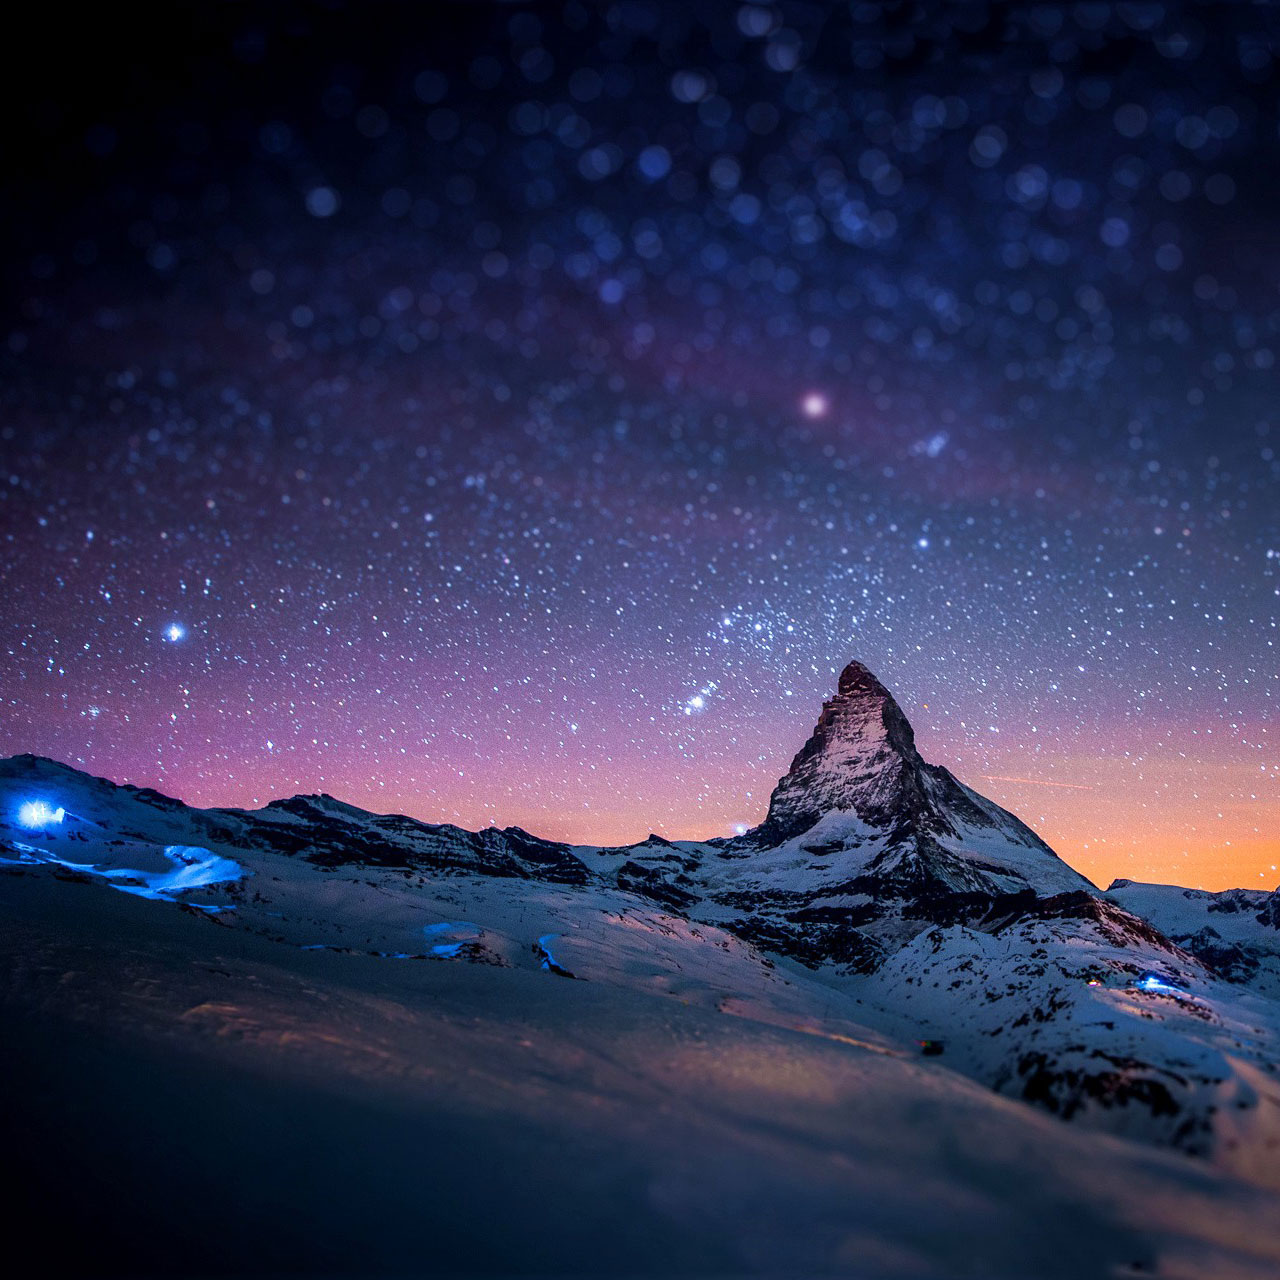 Samsung Galaxy Tab Stars And Snow Night In The Alps Wallpaper